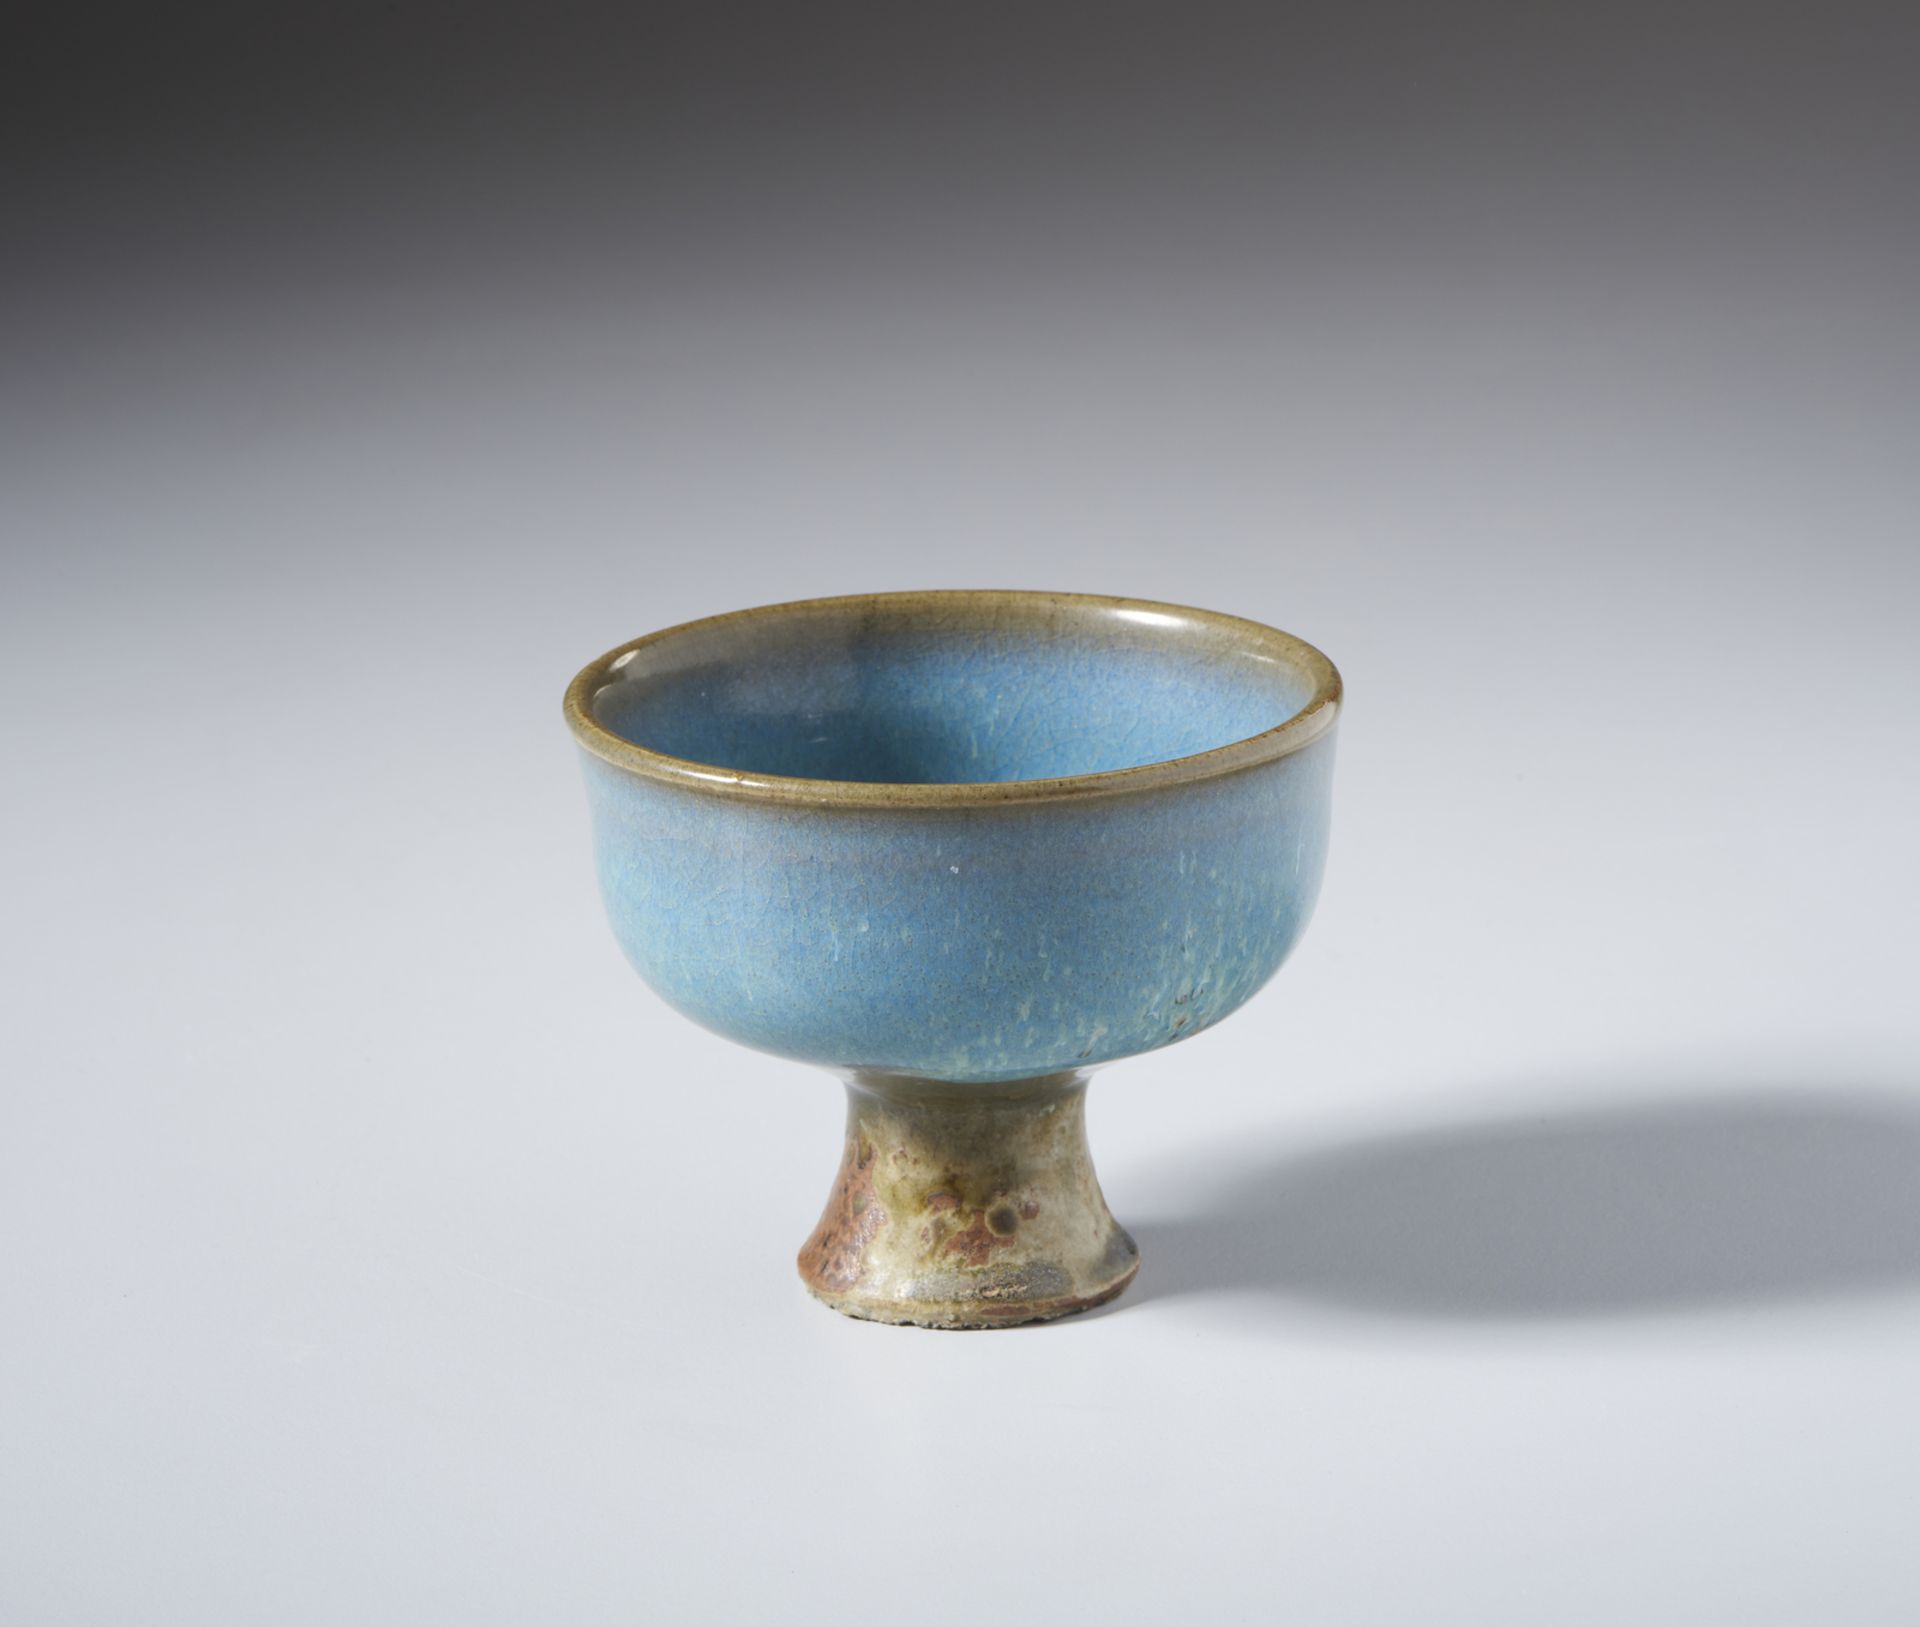 A Jun ware stem cup with purple spot China, Qing, 19th centuryCm 9,50 x 7,50